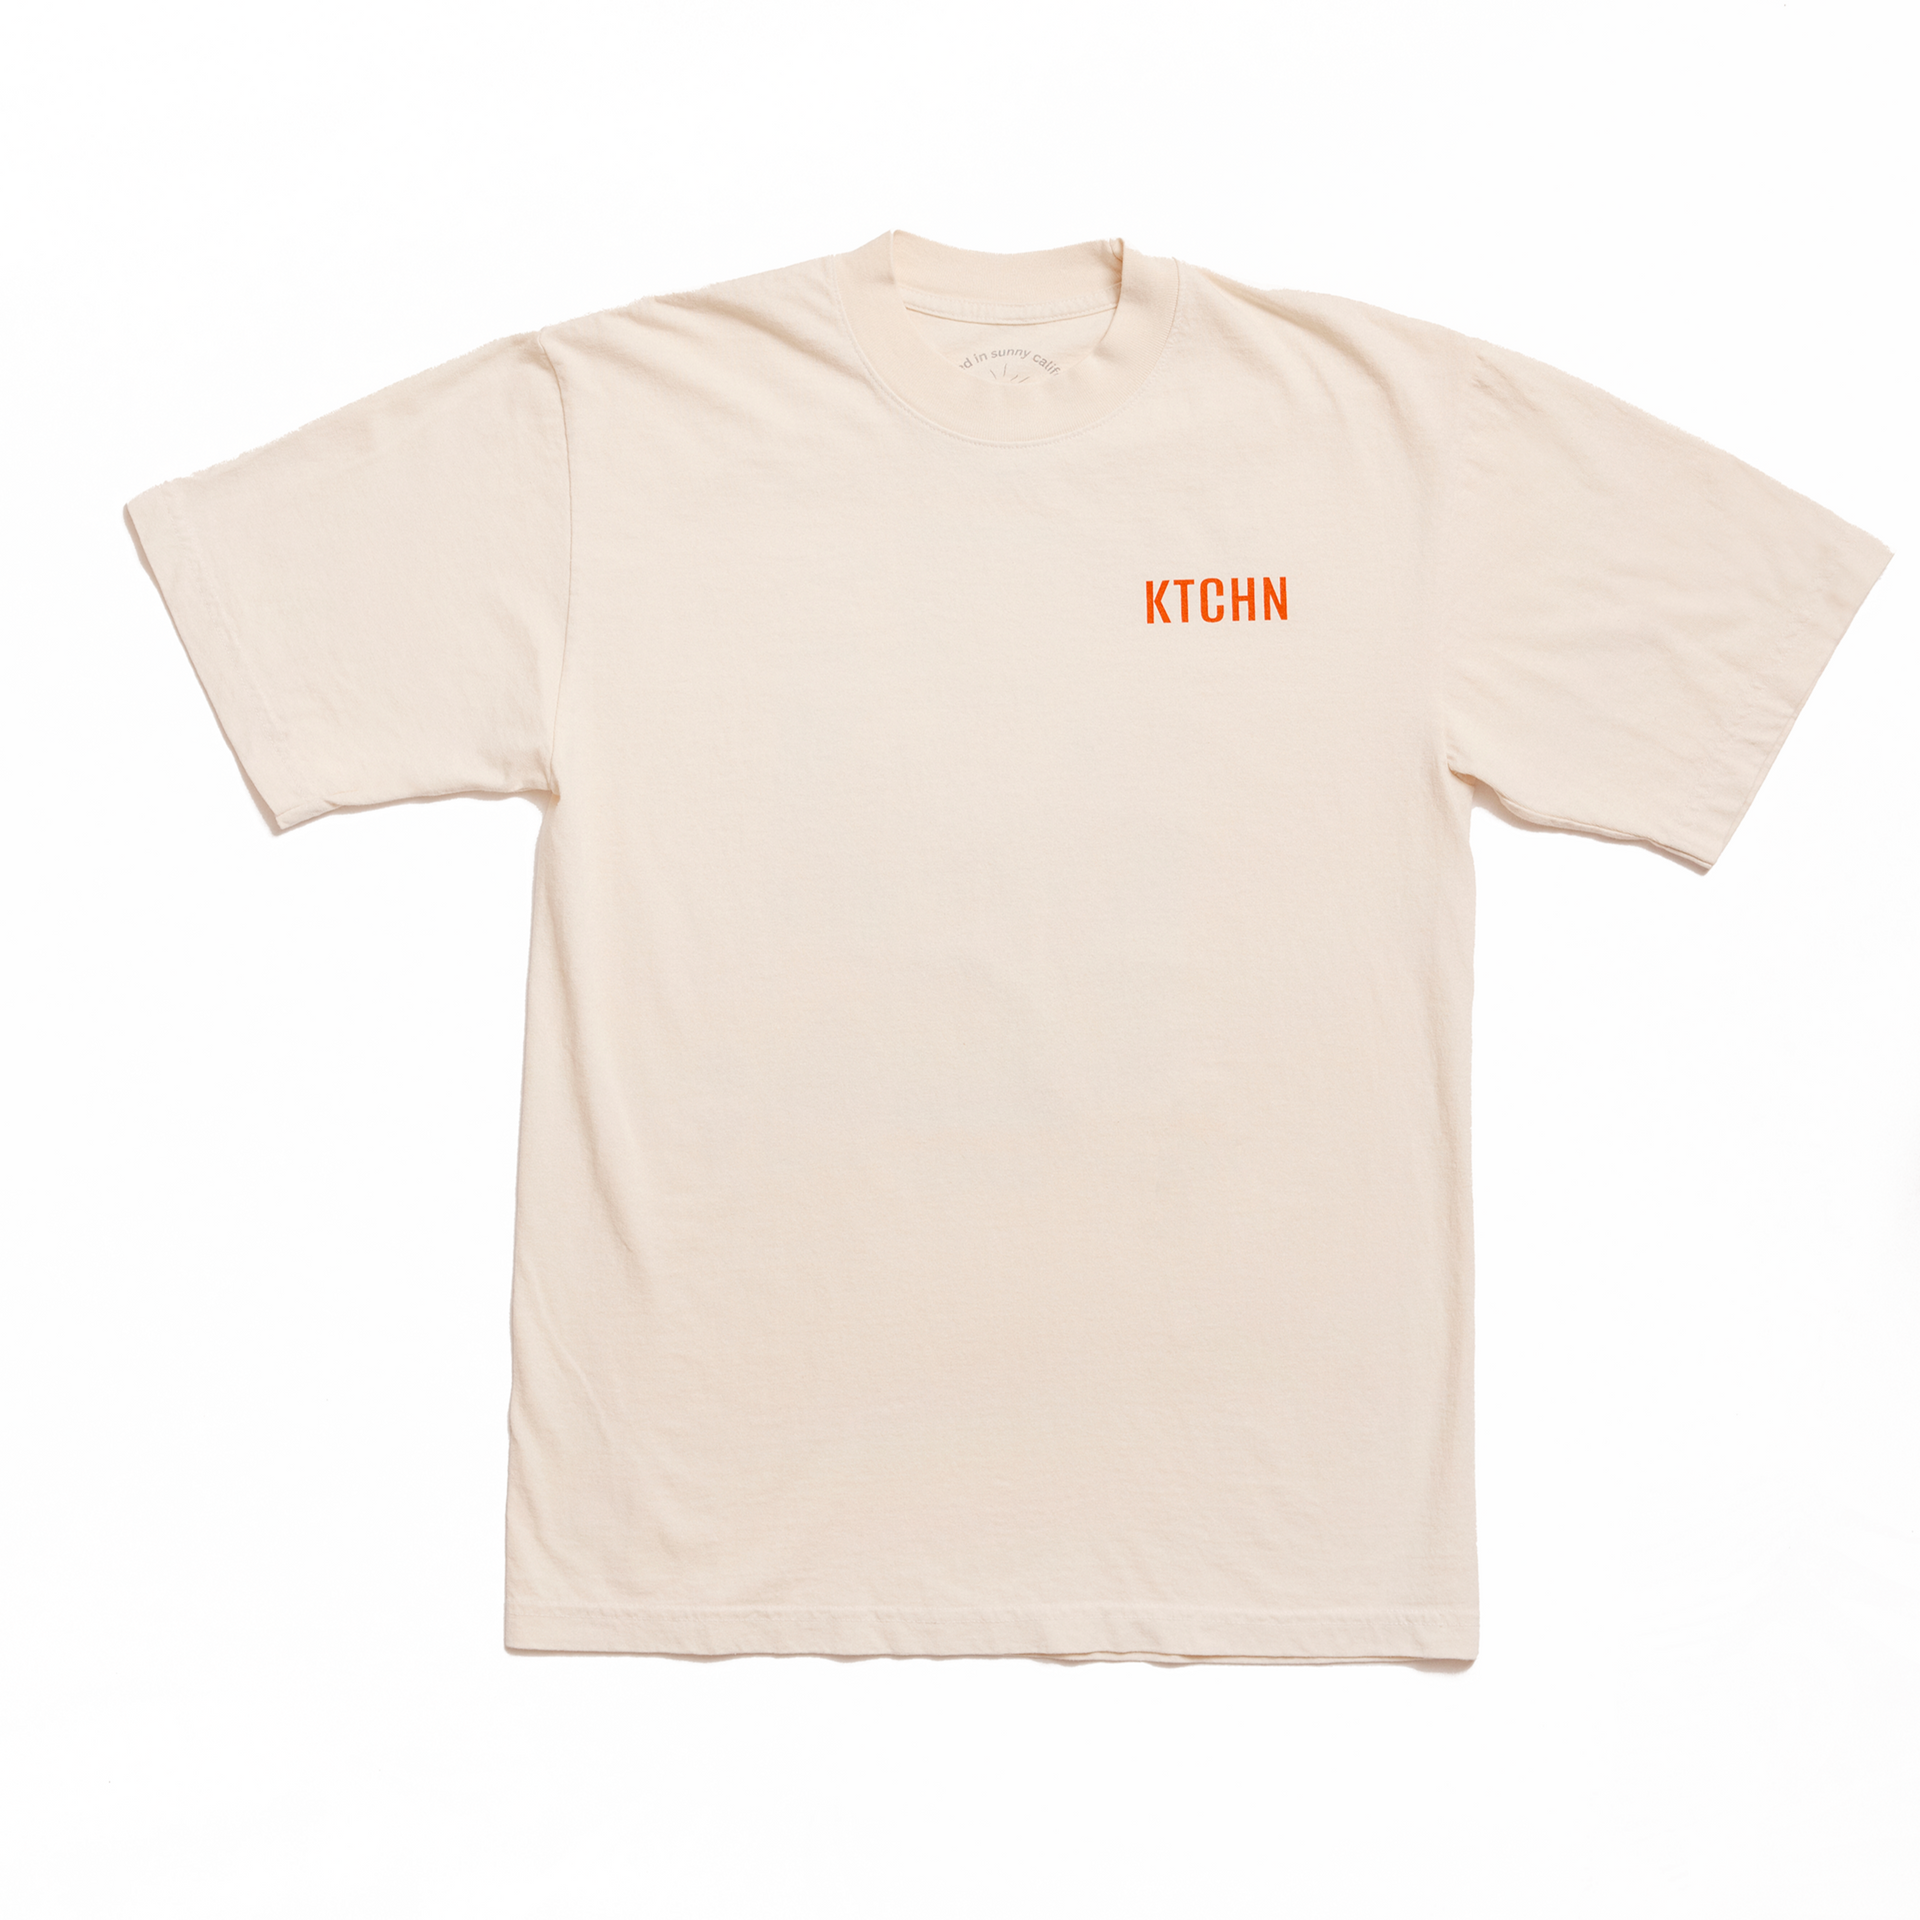 KTCHN King of the Court Tee